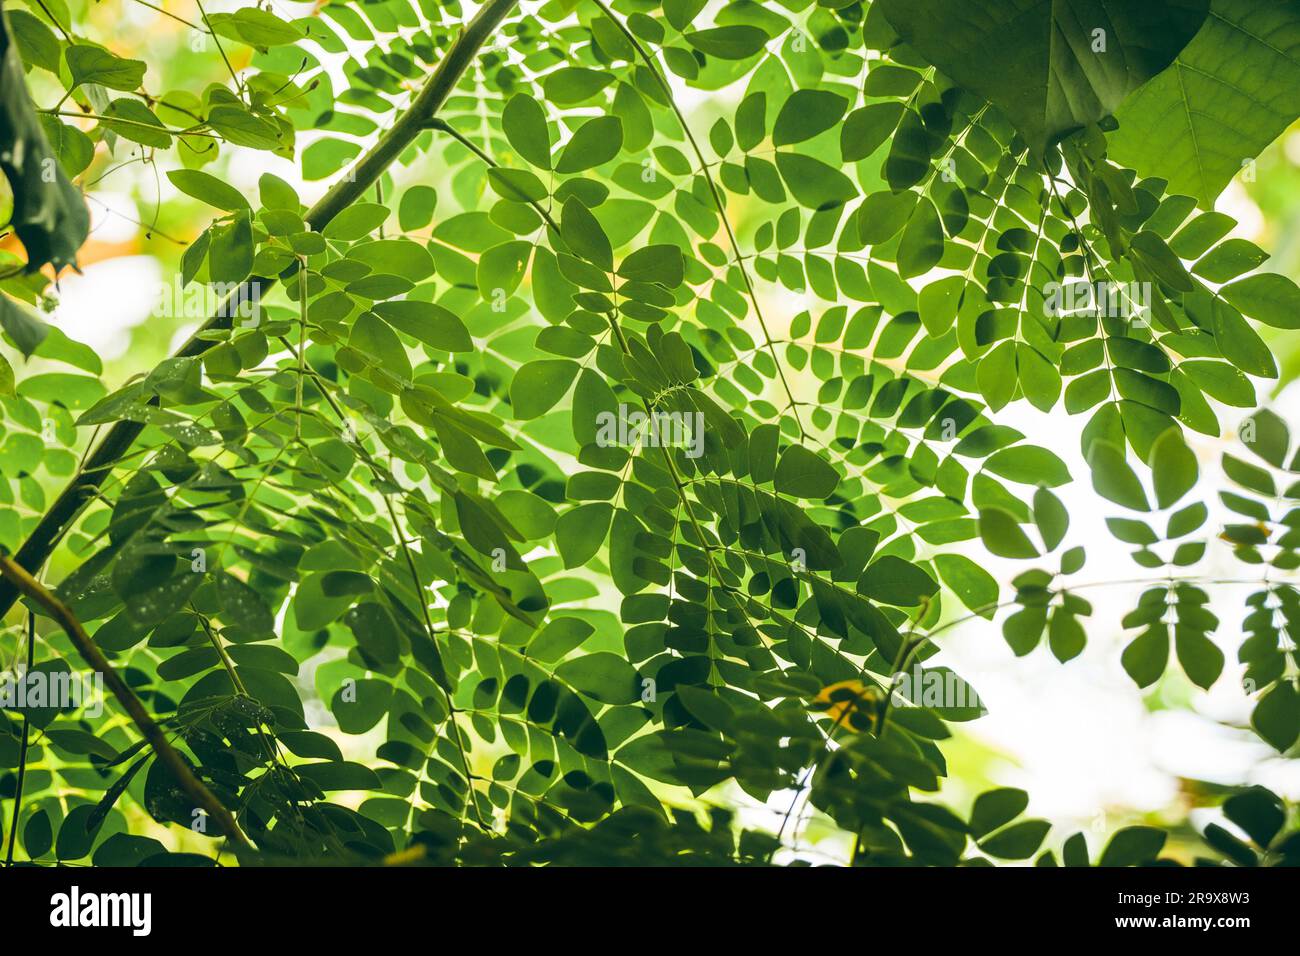 Tropical vegetation with green leaves in bright light Stock Photo